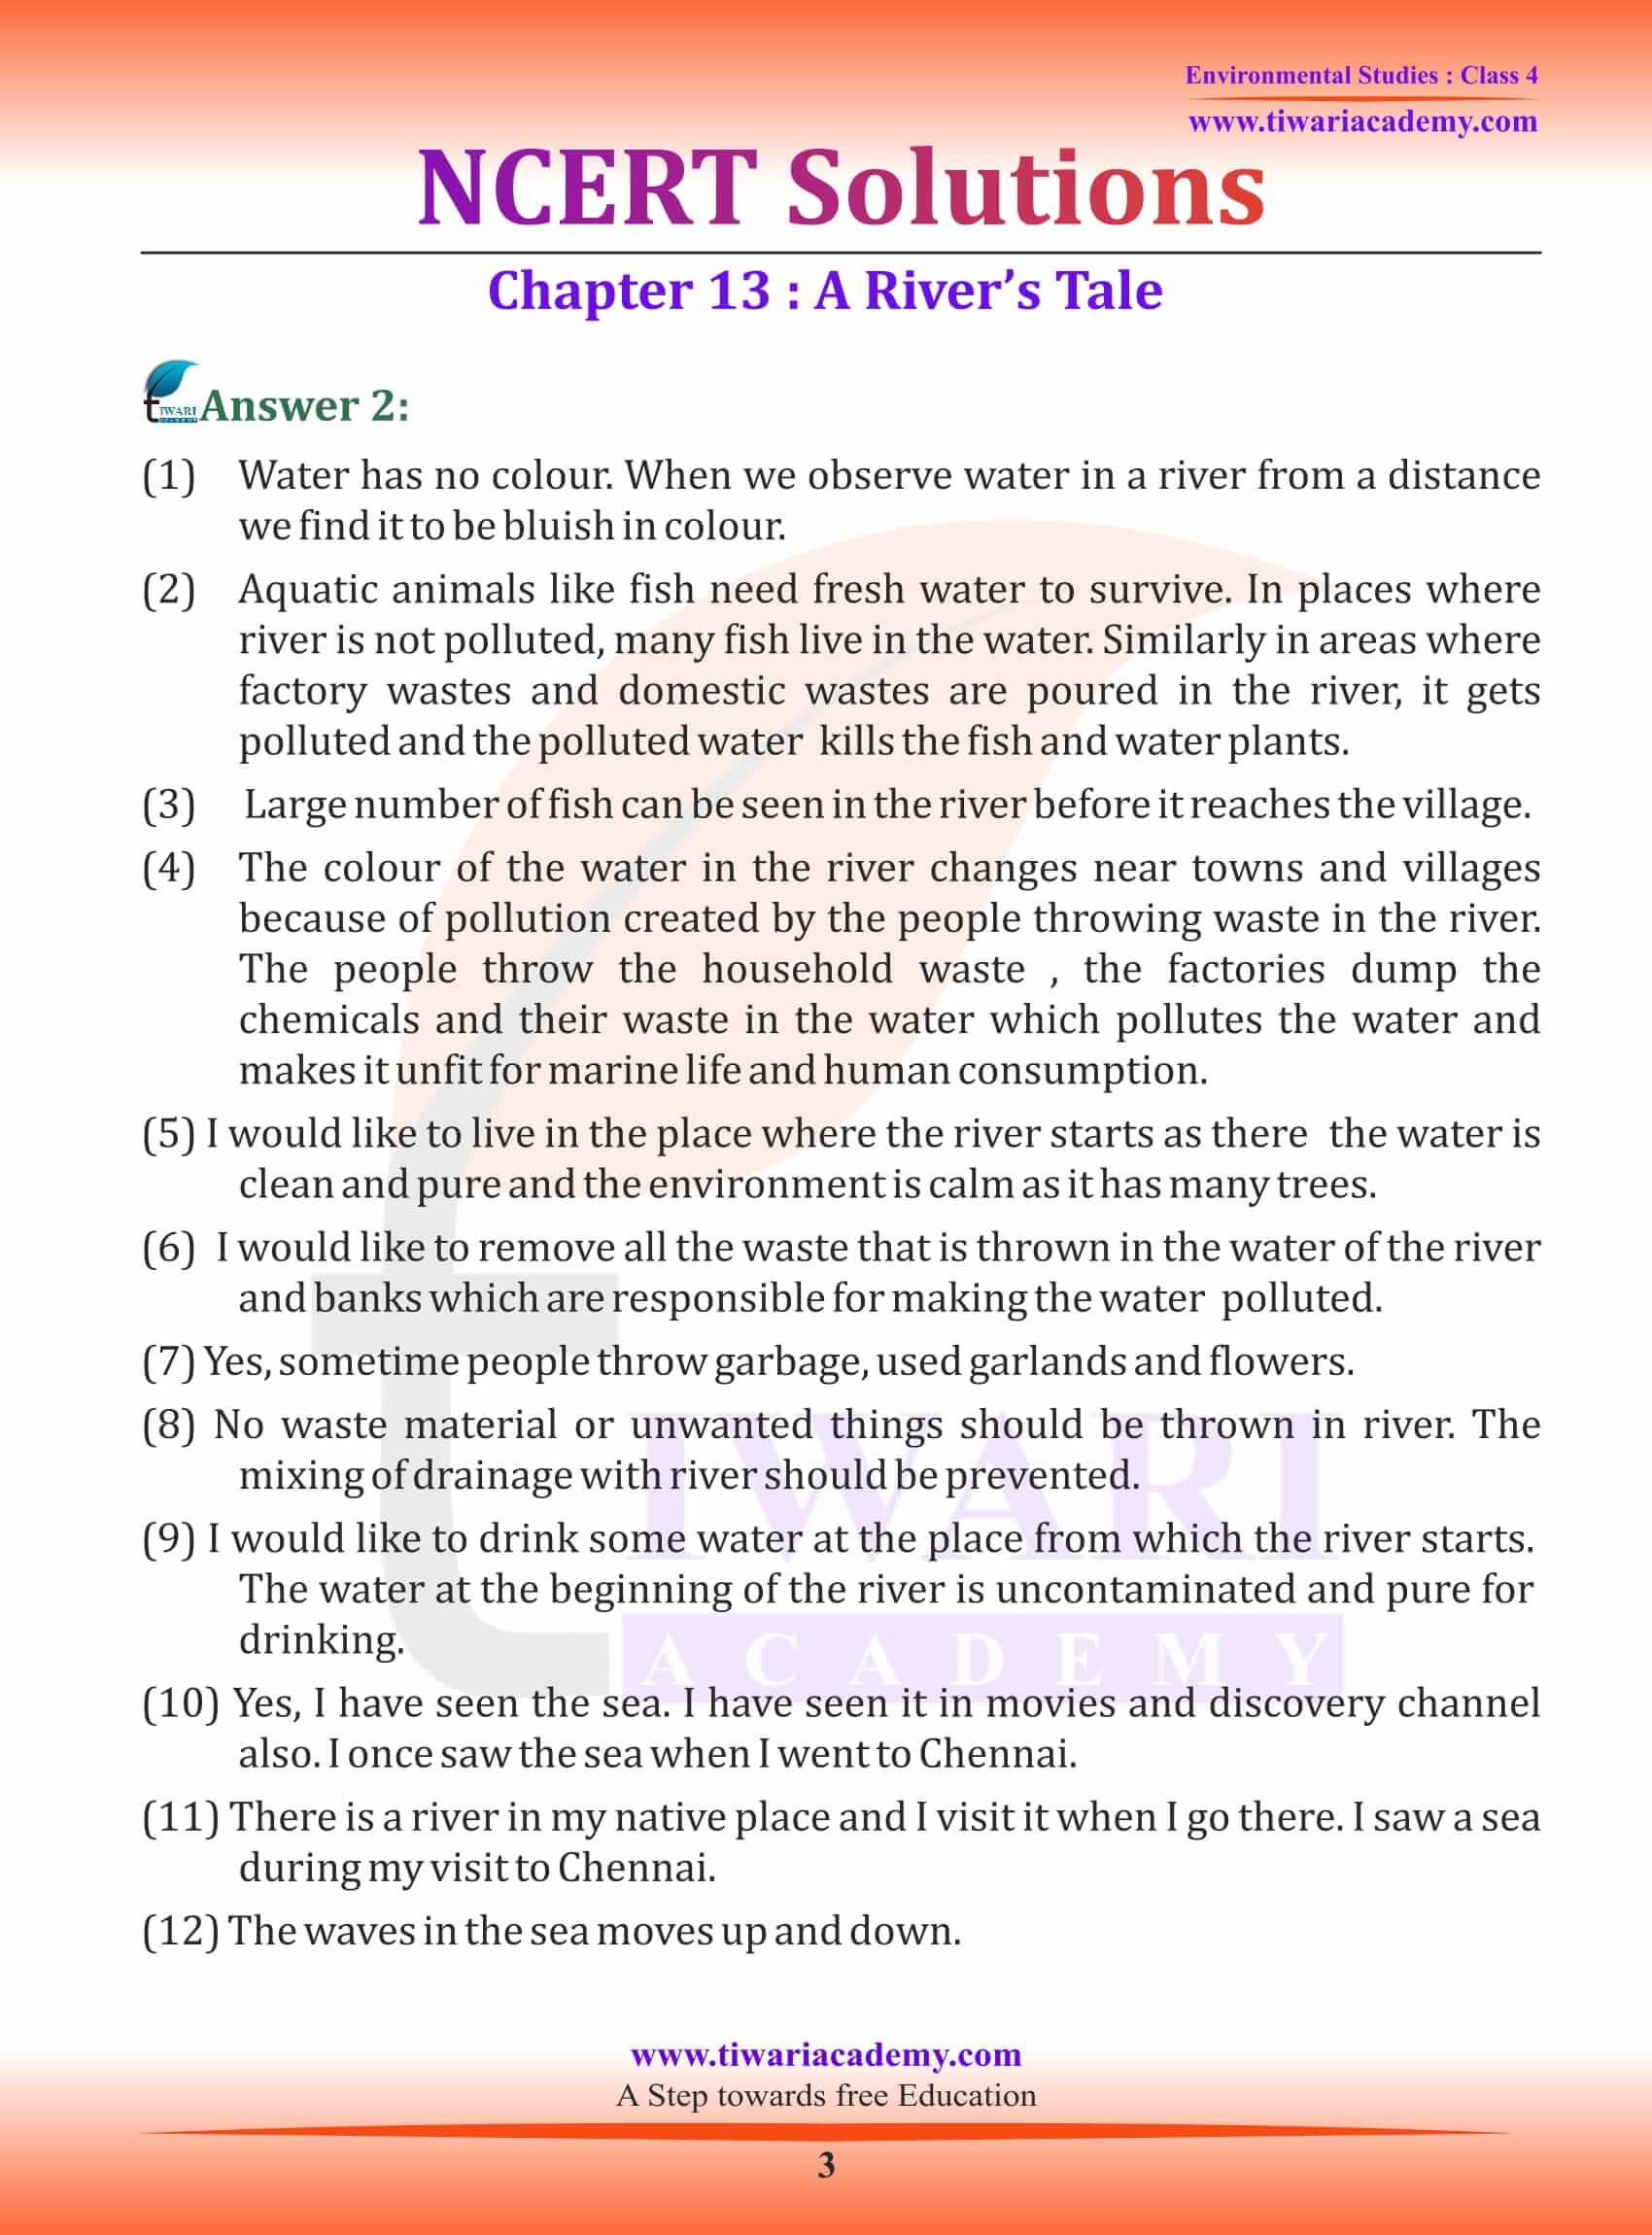 NCERT Solutions for Class 4 EVS Chapter 13 in English Medium